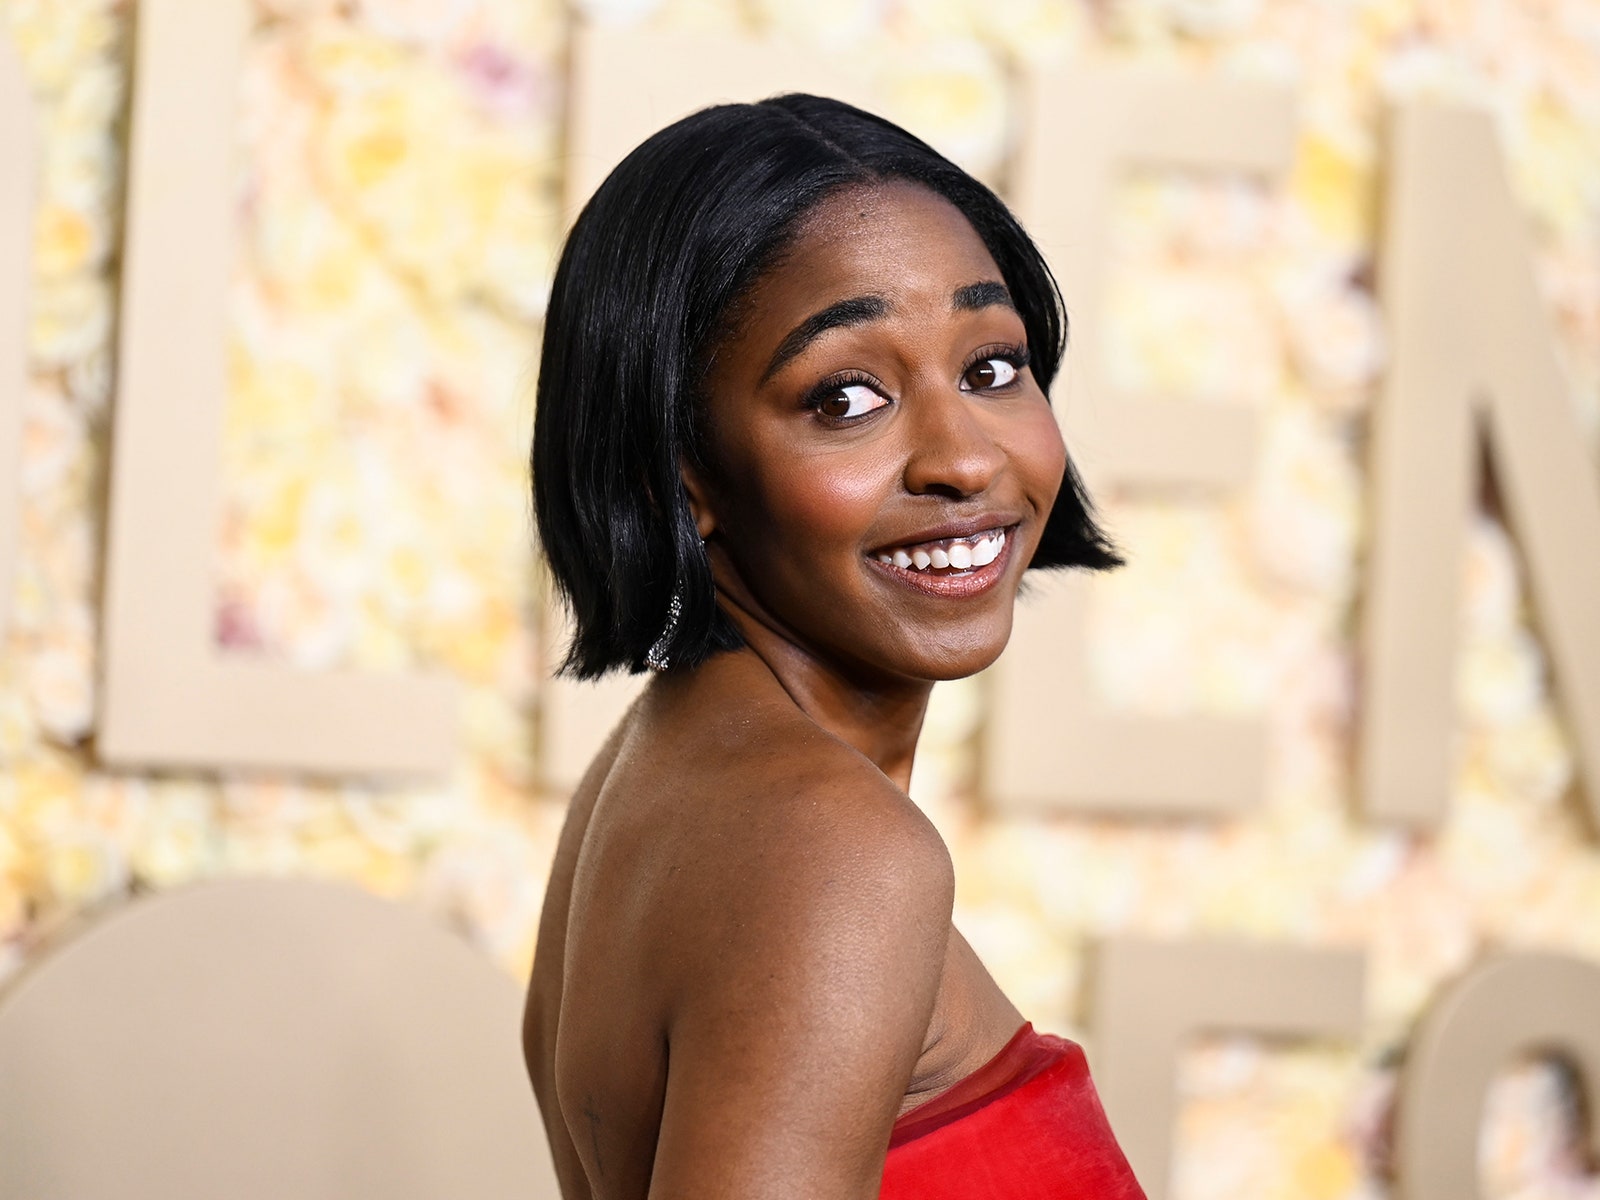 Bob haircuts dominated the 2024 Golden Globes red carpet